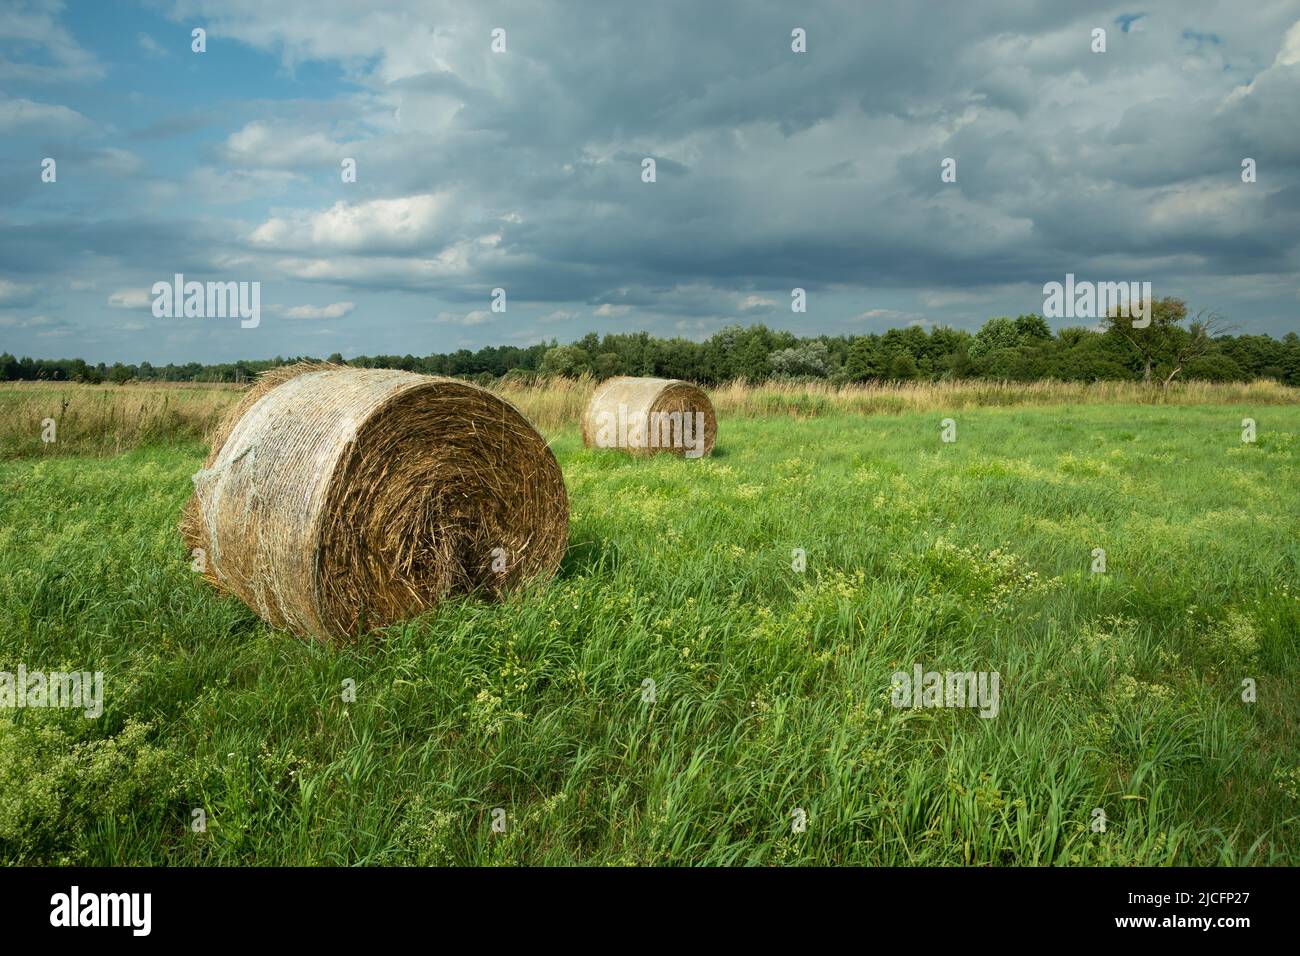 Straw bale in meadow and cloudy sky, rural view Stock Photo